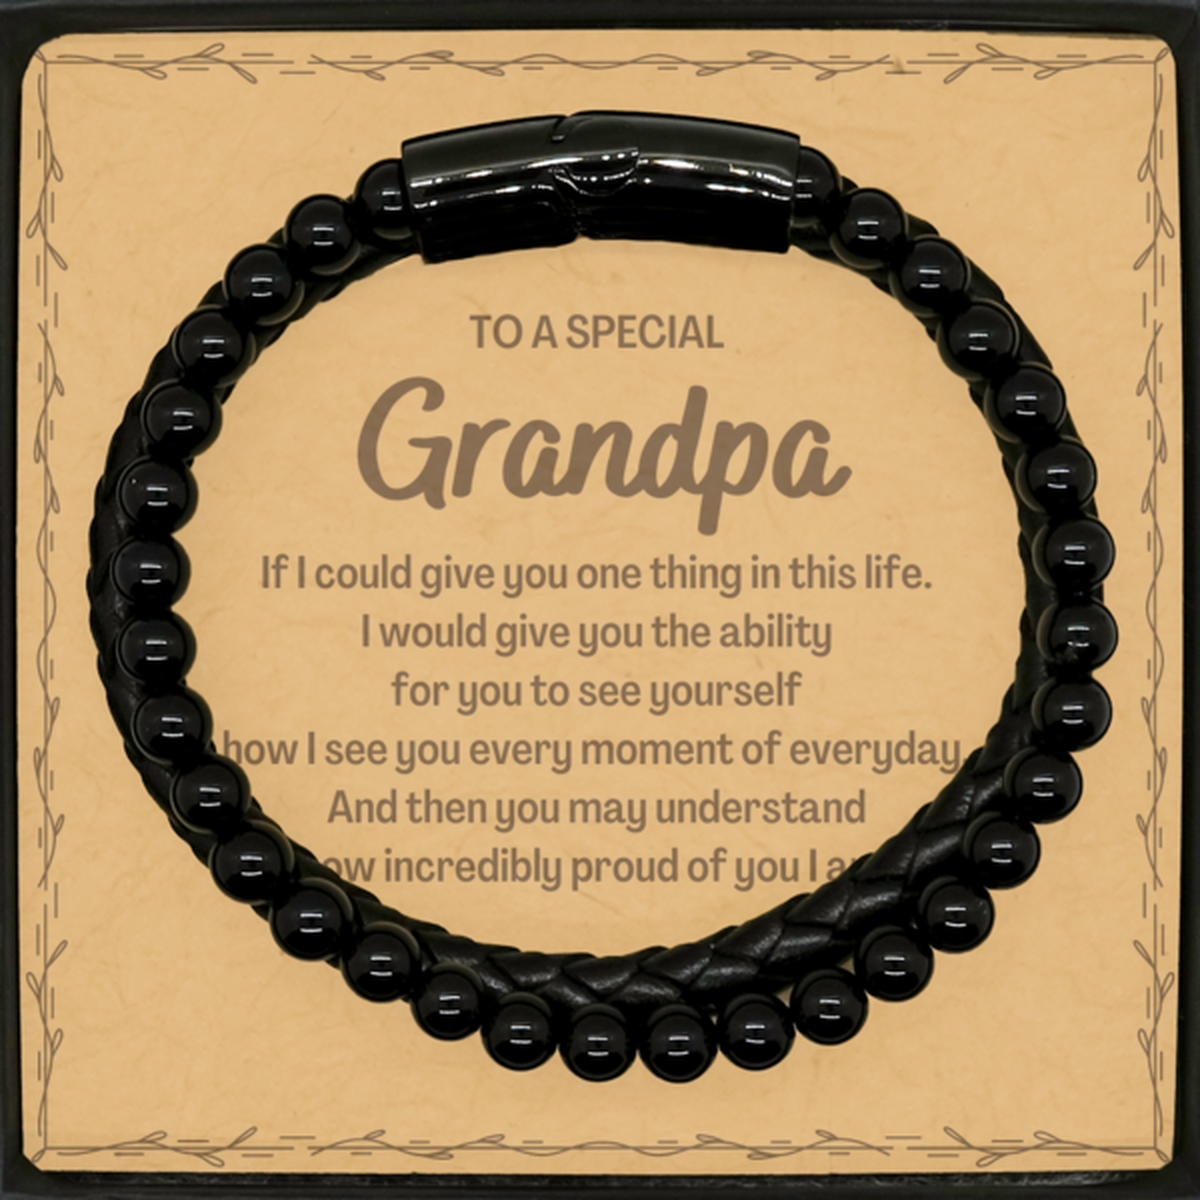 To My Grandpa Stone Leather Bracelets, Gifts For Grandpa Message Card, Inspirational Gifts for Christmas Birthday, Epic Gifts for Grandpa To A Special Grandpa how incredibly proud of you I am